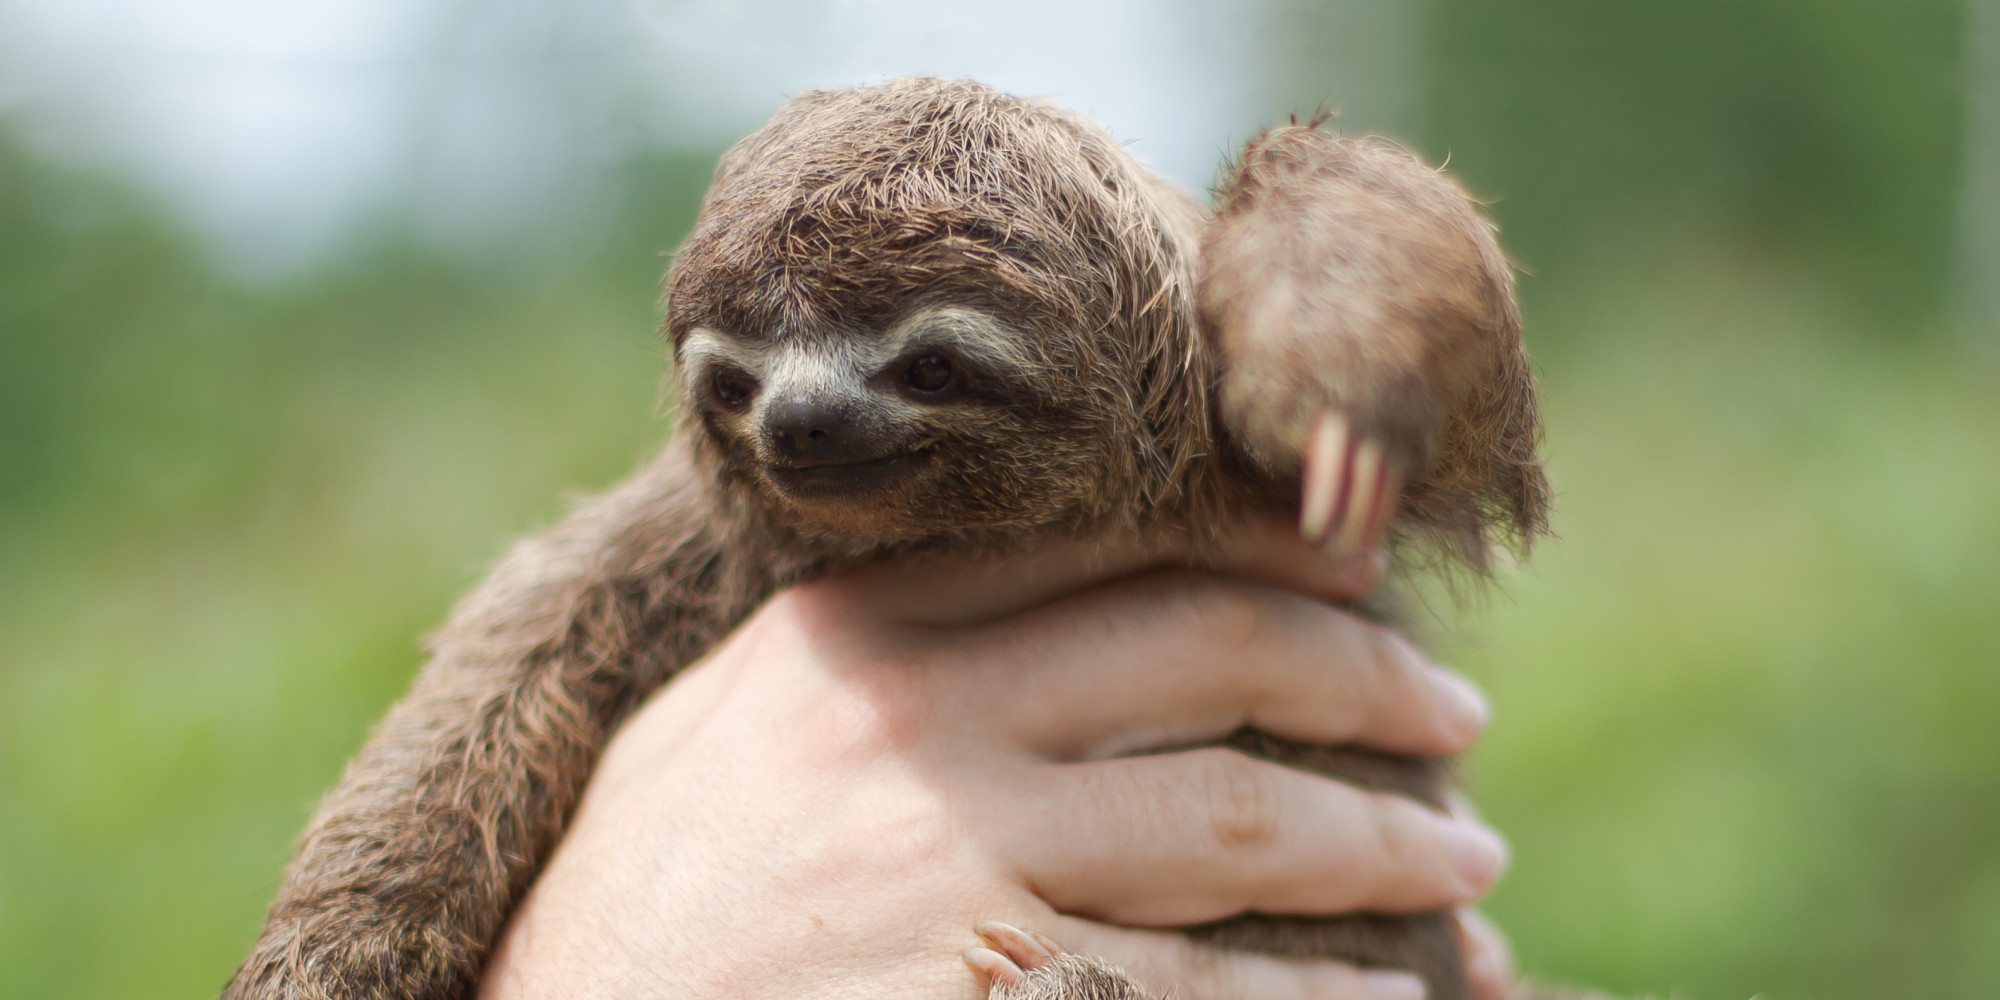 Image result for best pics of baby sloths